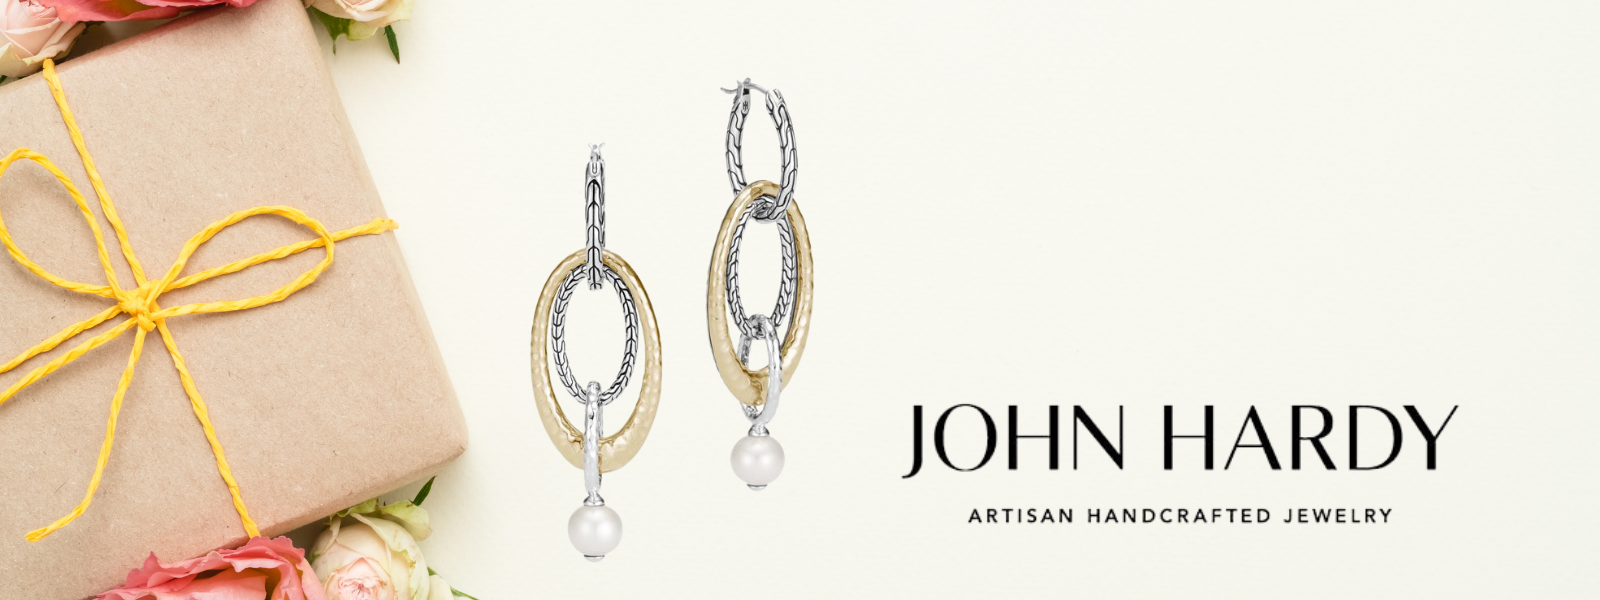 Highlighted Subcategory Name This banner image is 1600 x 600 pixels on desktop Peter & Co. Jewelers Avon Lake, OH